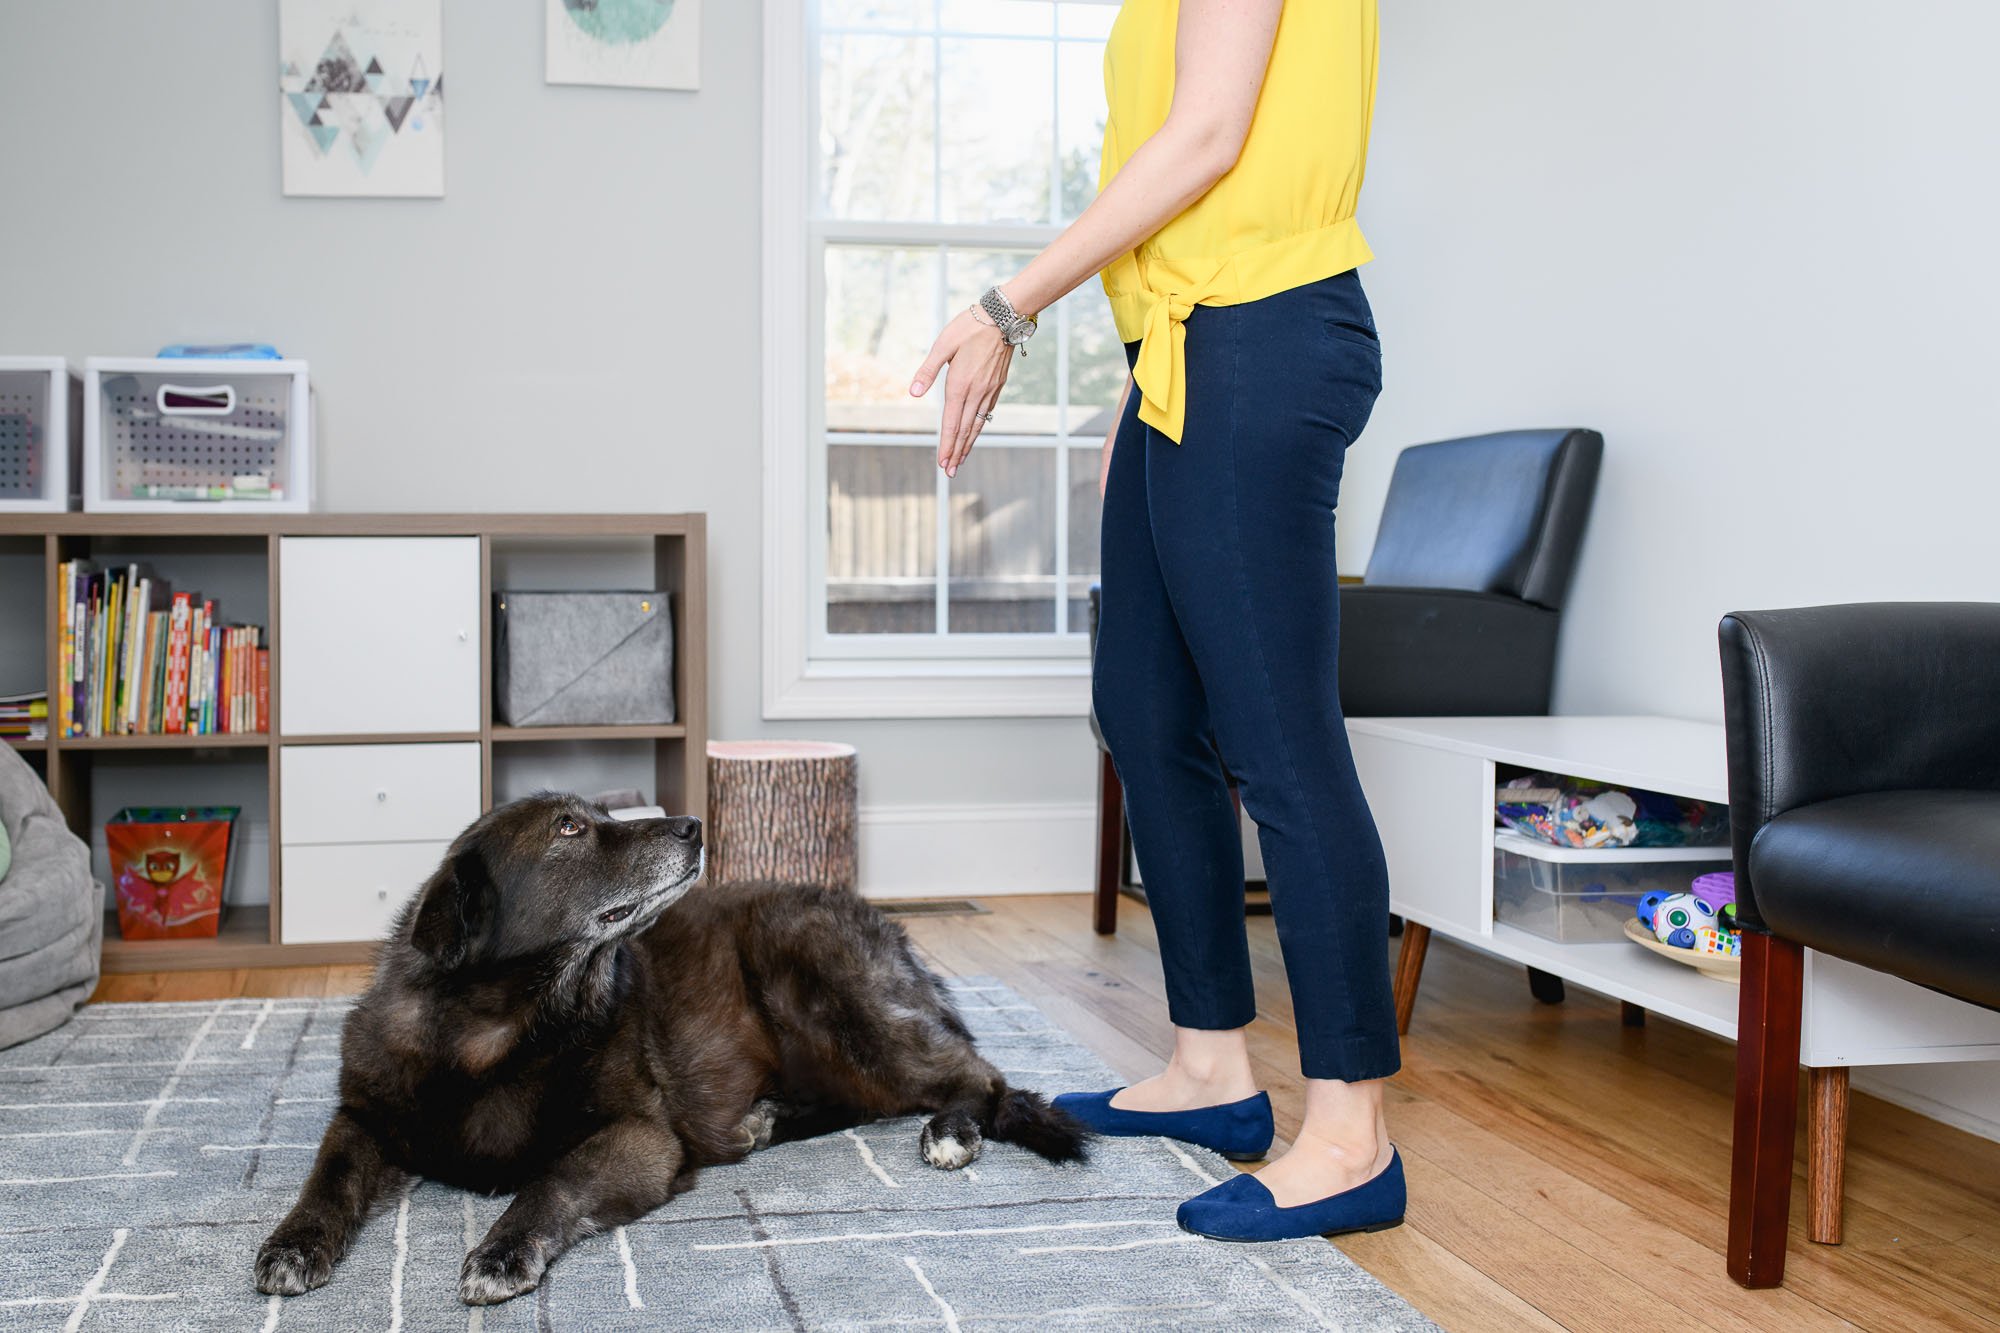 Lindsey working with "Dogtor Ed", a therapy dog who is part of her naturopathic practice. Personal Branding photoshoot in Wilton CT by N. Lalor Photography.